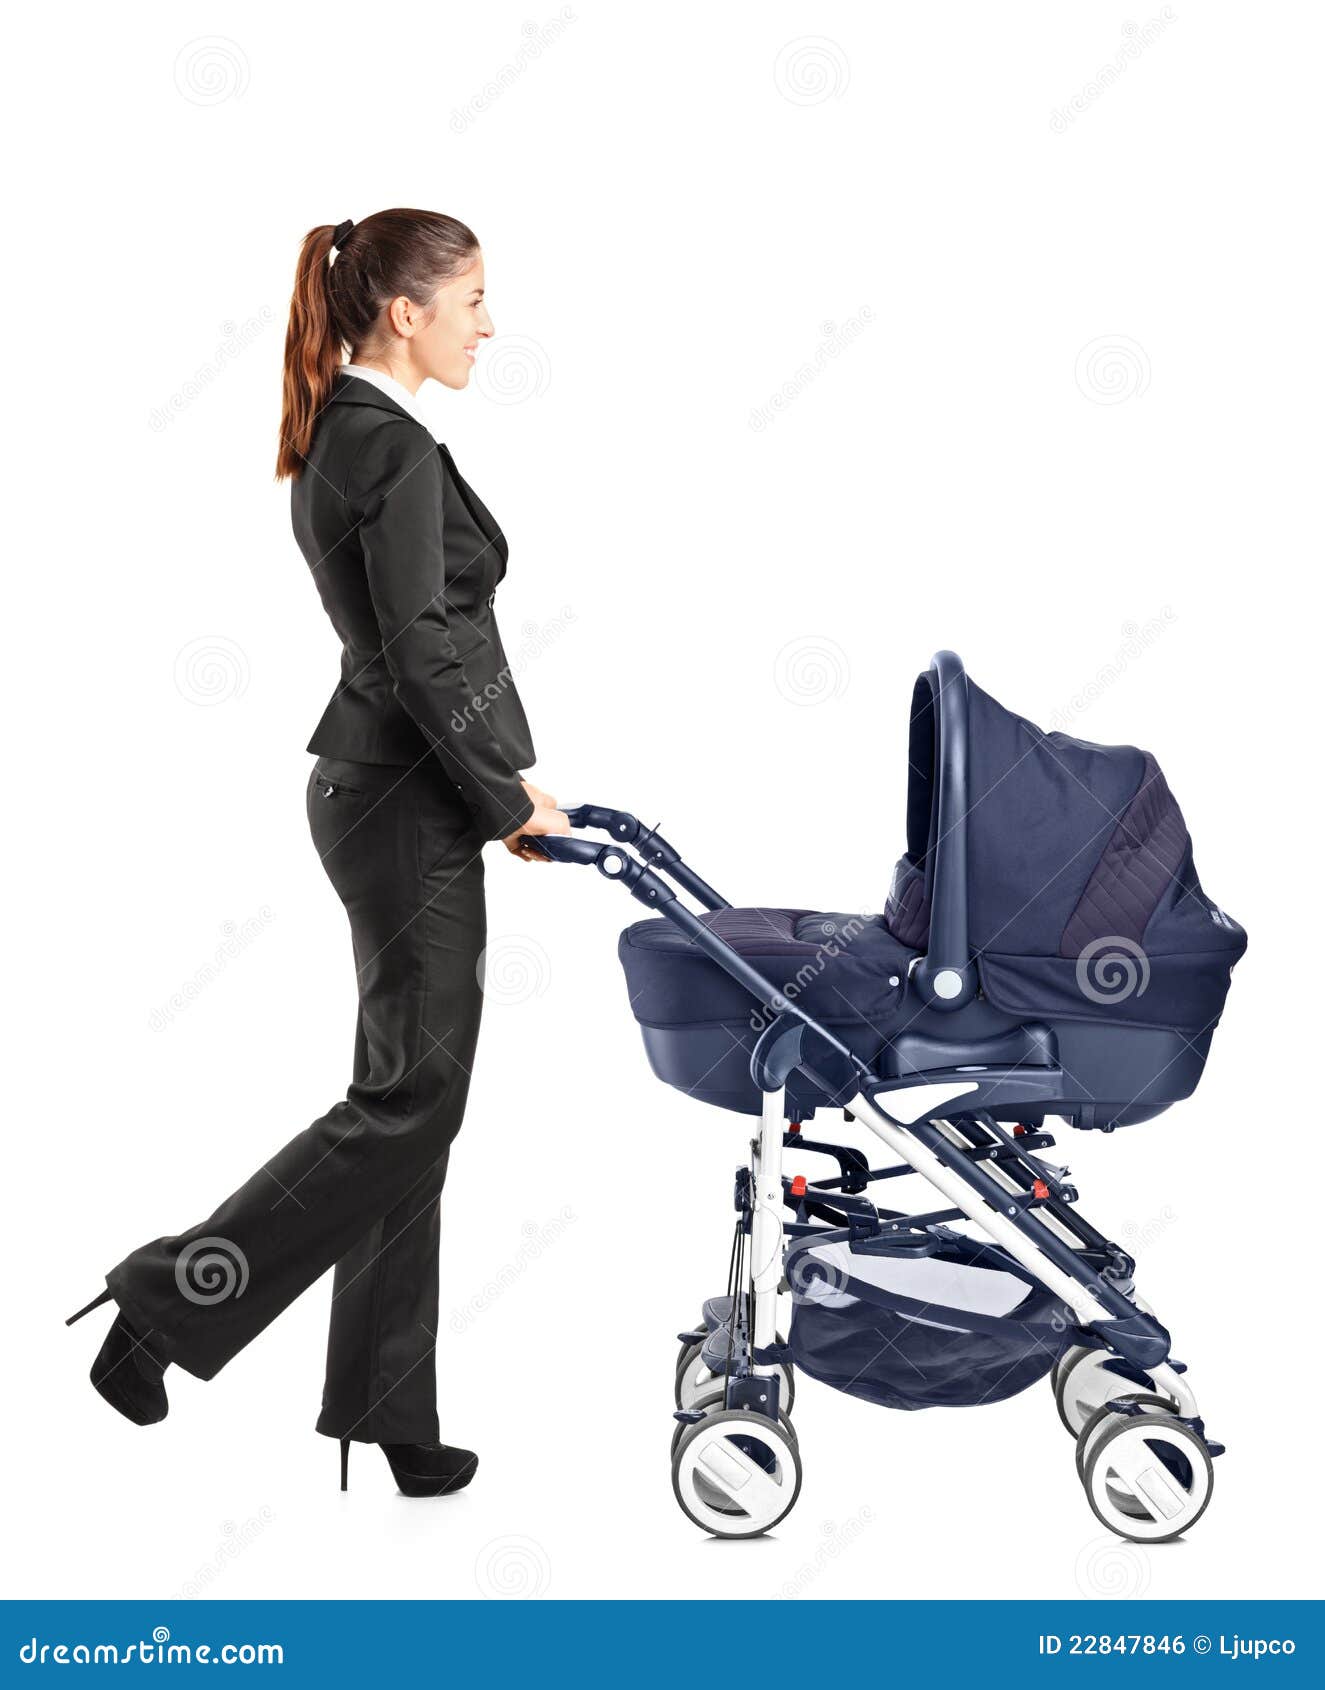 New Barclay Production Lady w/ Baby Buggy 